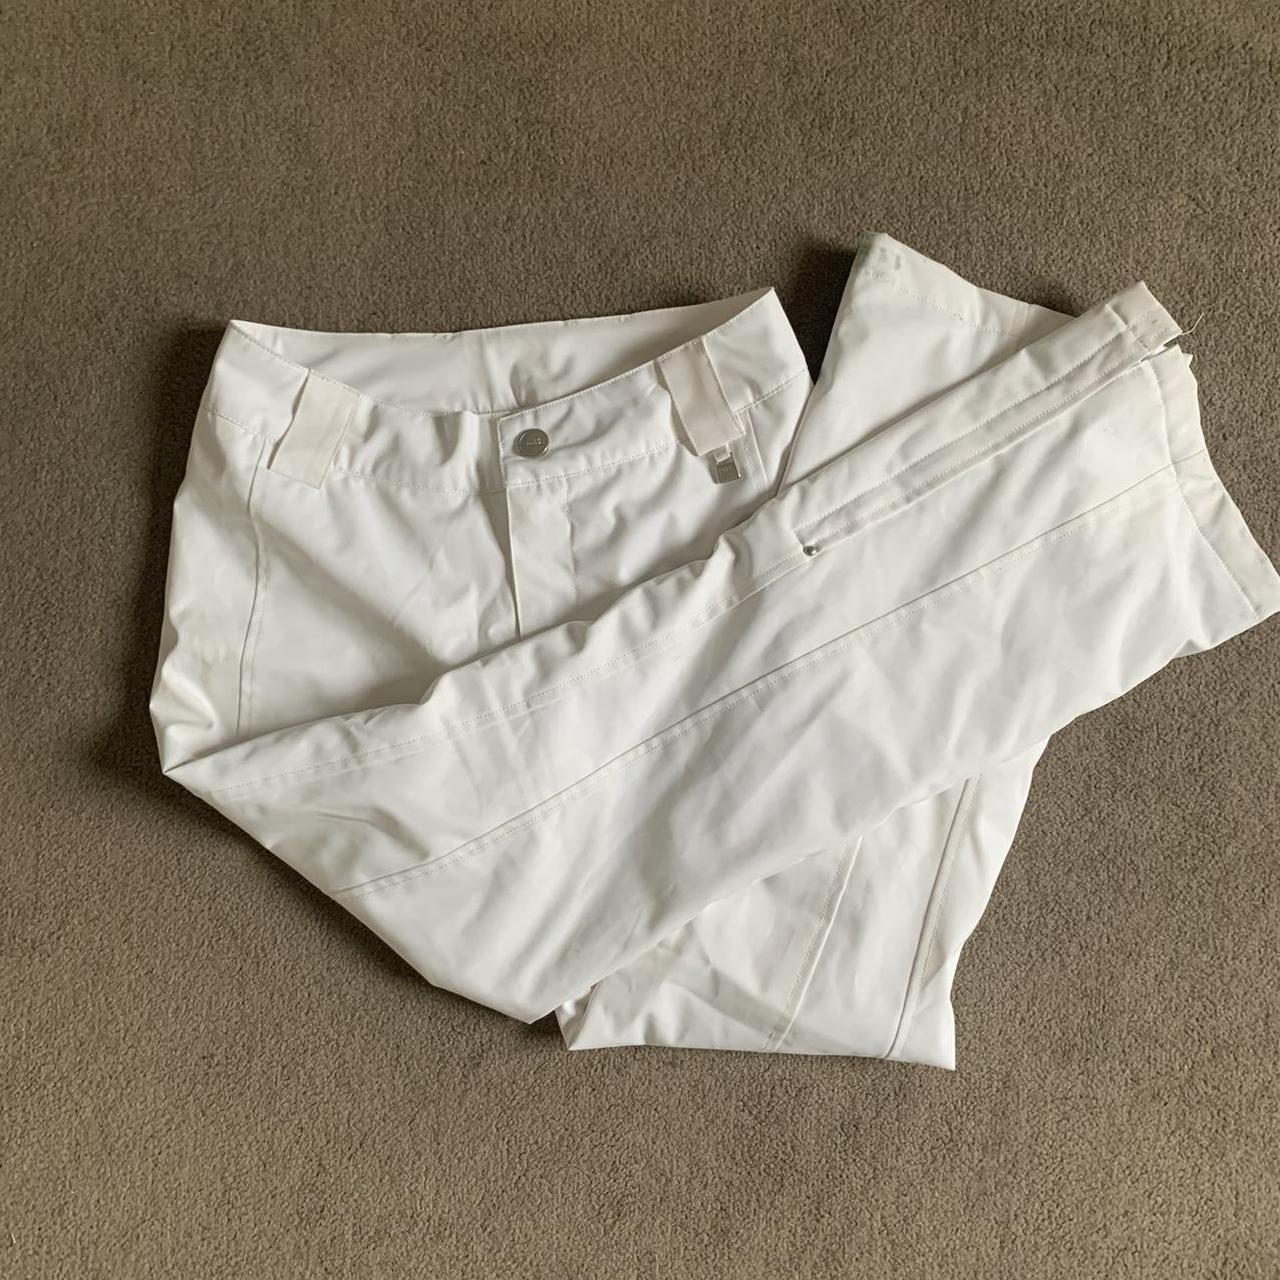 SKI PANTS - good condition / just need a dry clean - - Depop